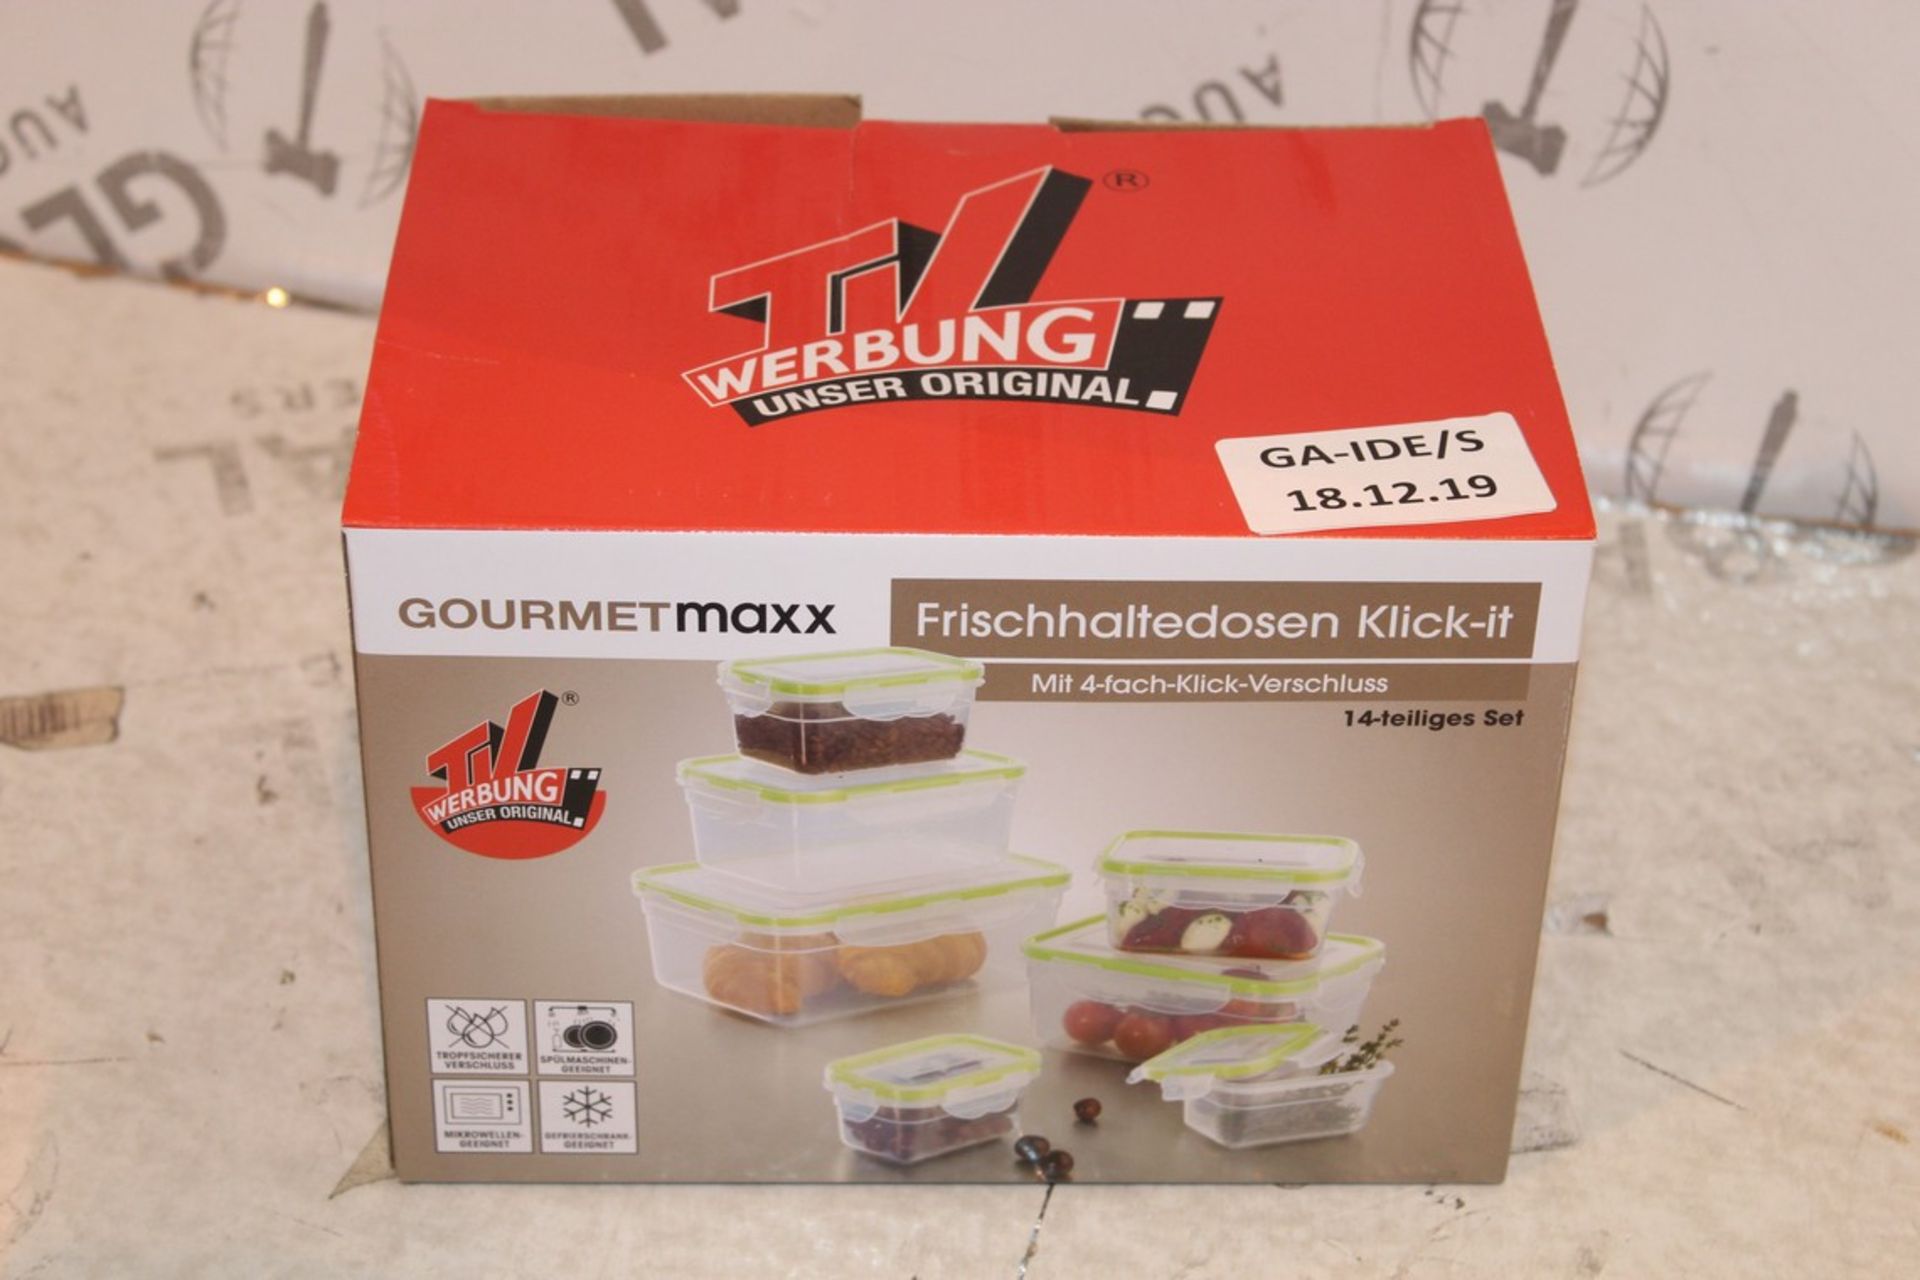 Lot to Contain 2 Boxed Gourmet Max Plastic Storage Box Sets RRP £60 (Appraisals Available Upon